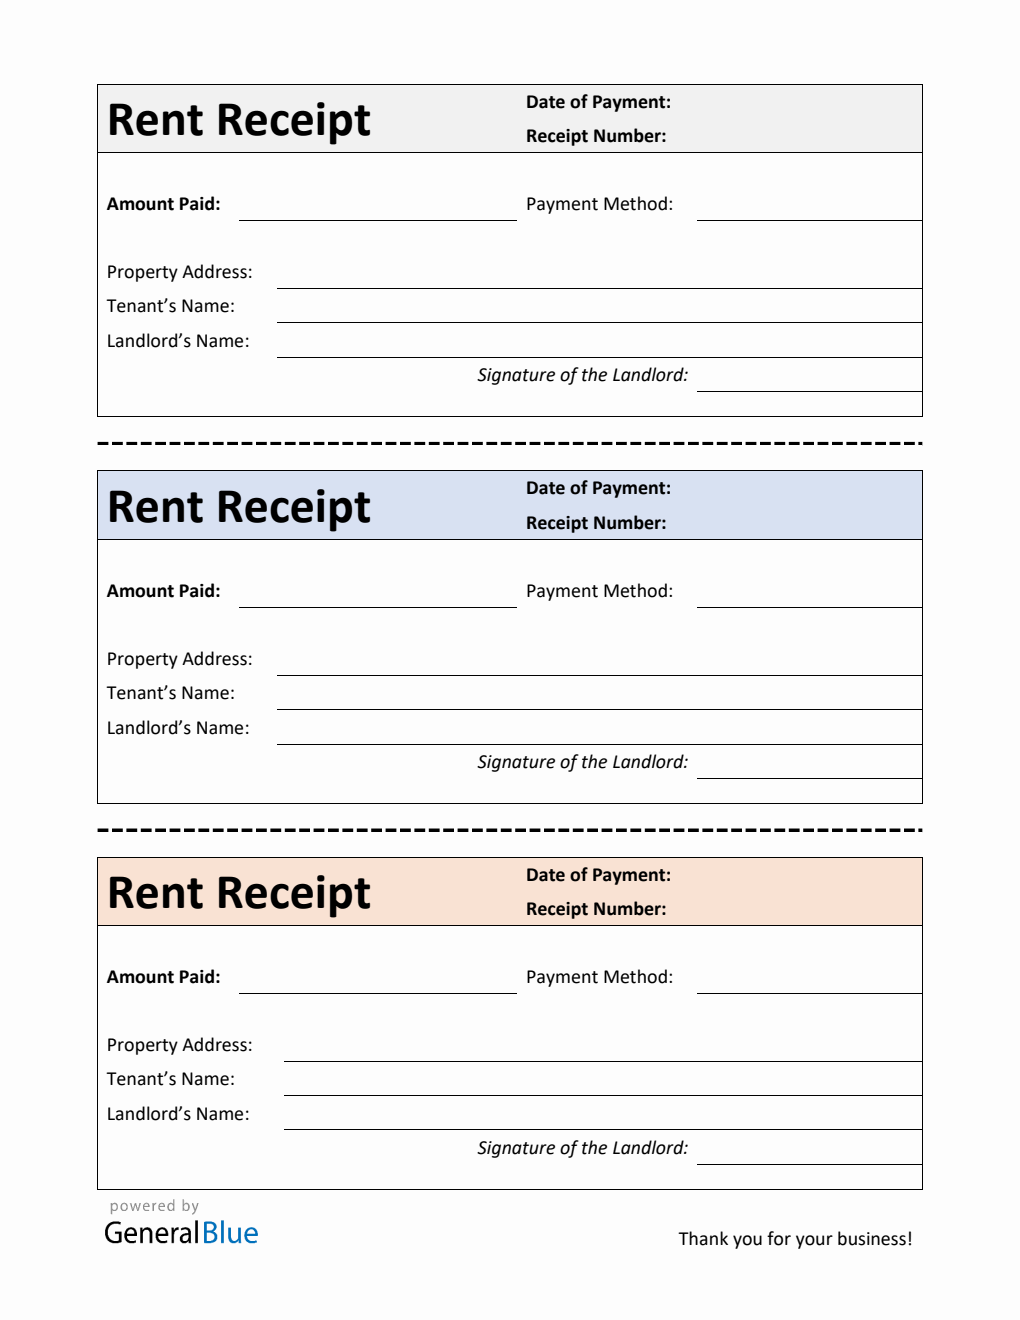 Simple Rent Receipt Template in Word